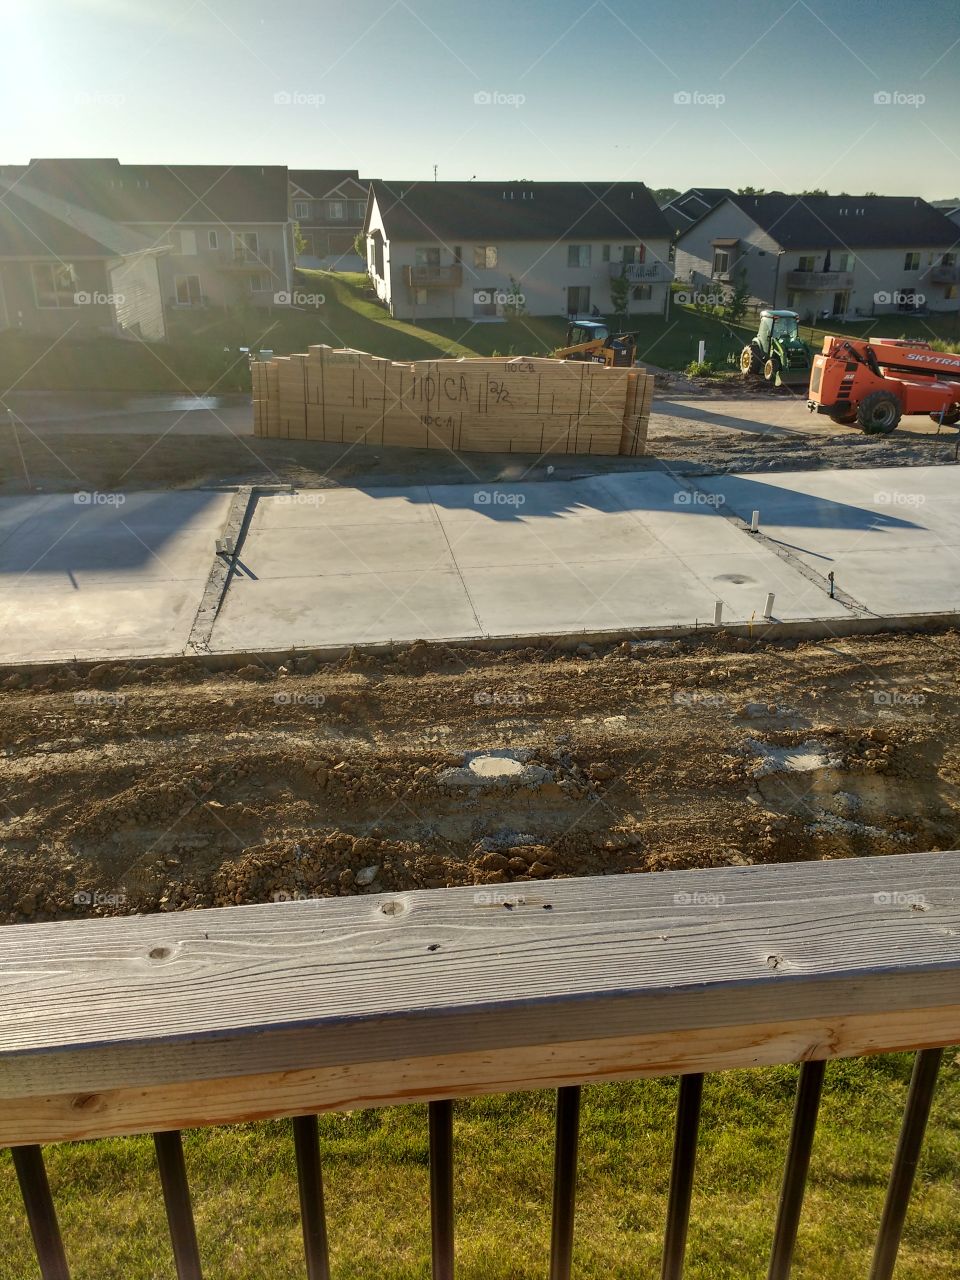 foundation poured, ready to build.